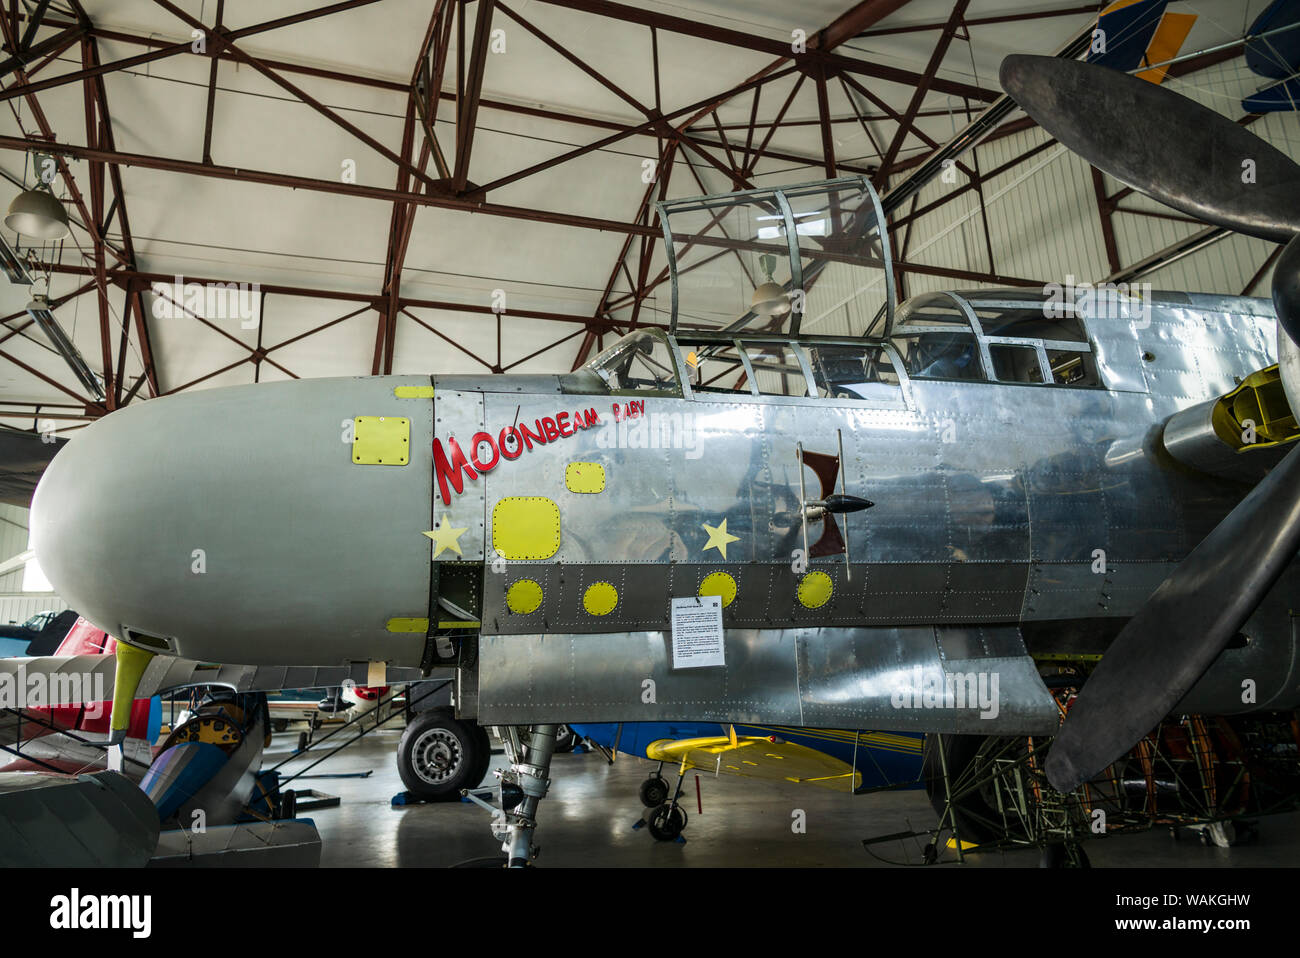 USA, Pennsylvania, Reading. Mid-Atlantic Air Museum, one of the last remaining WW2-era US Army Air Force P-61 Black Widow night fighters undergoing restoration (Editorial Use Only) Stock Photo